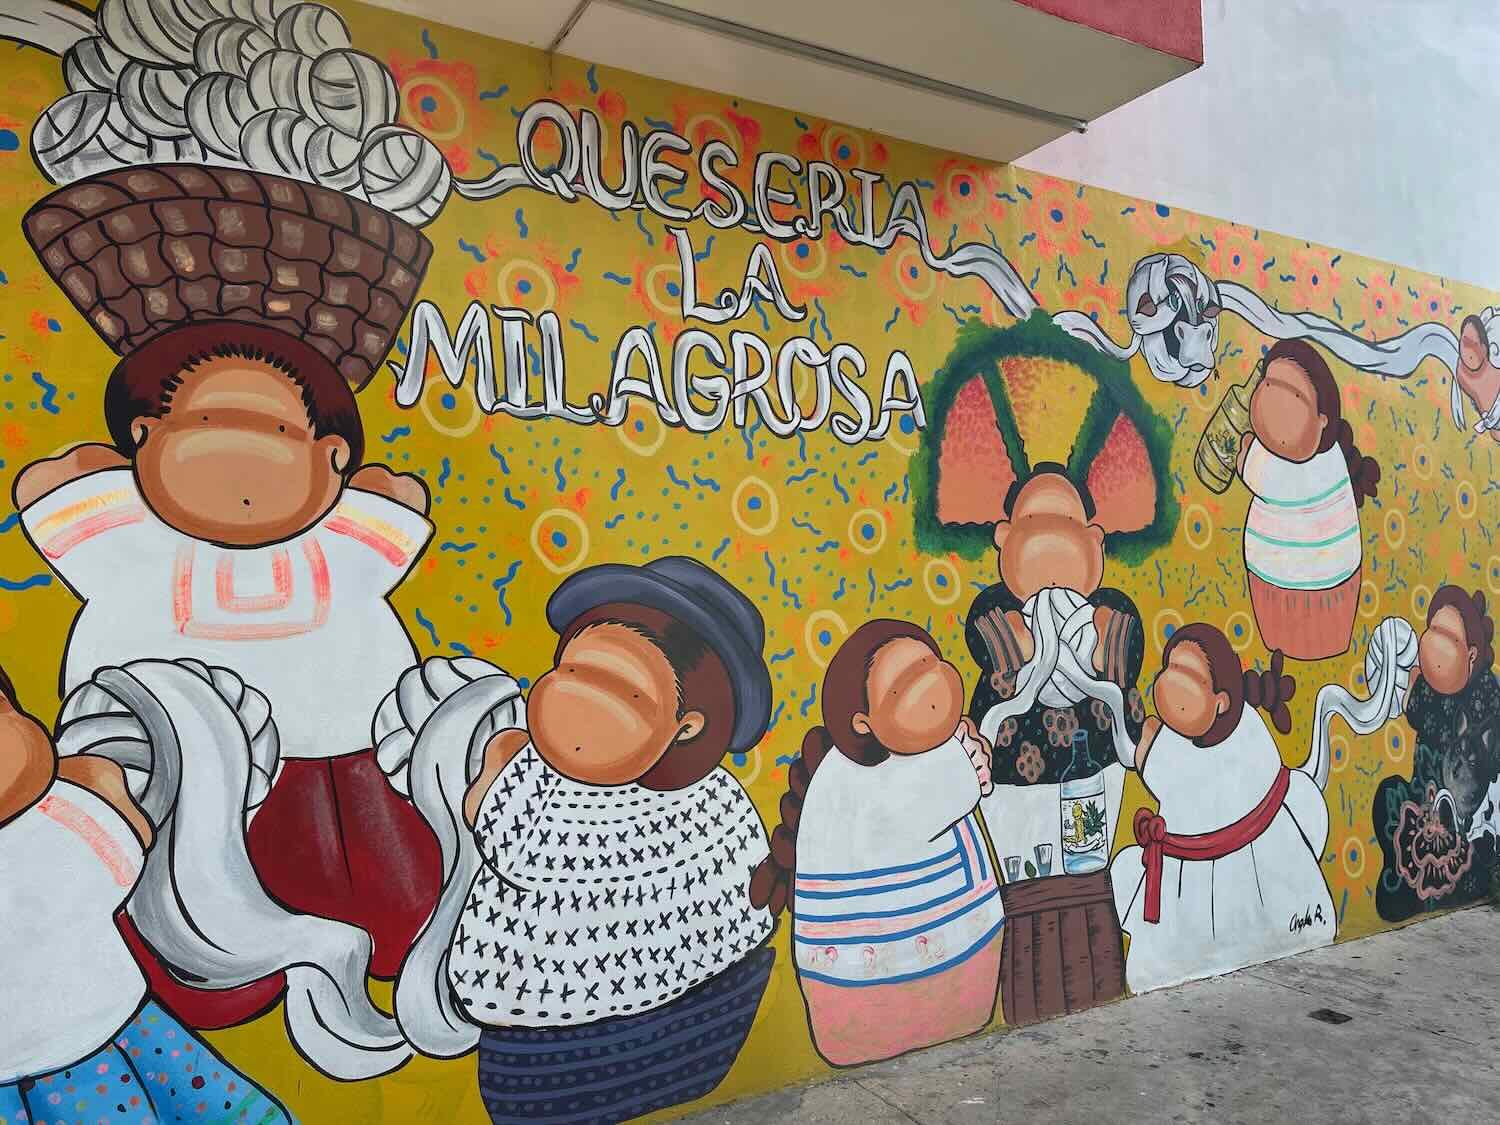 A playful mural at a Oaxacan cheese shop. The balls represent traditional Oaxacan string cheese.